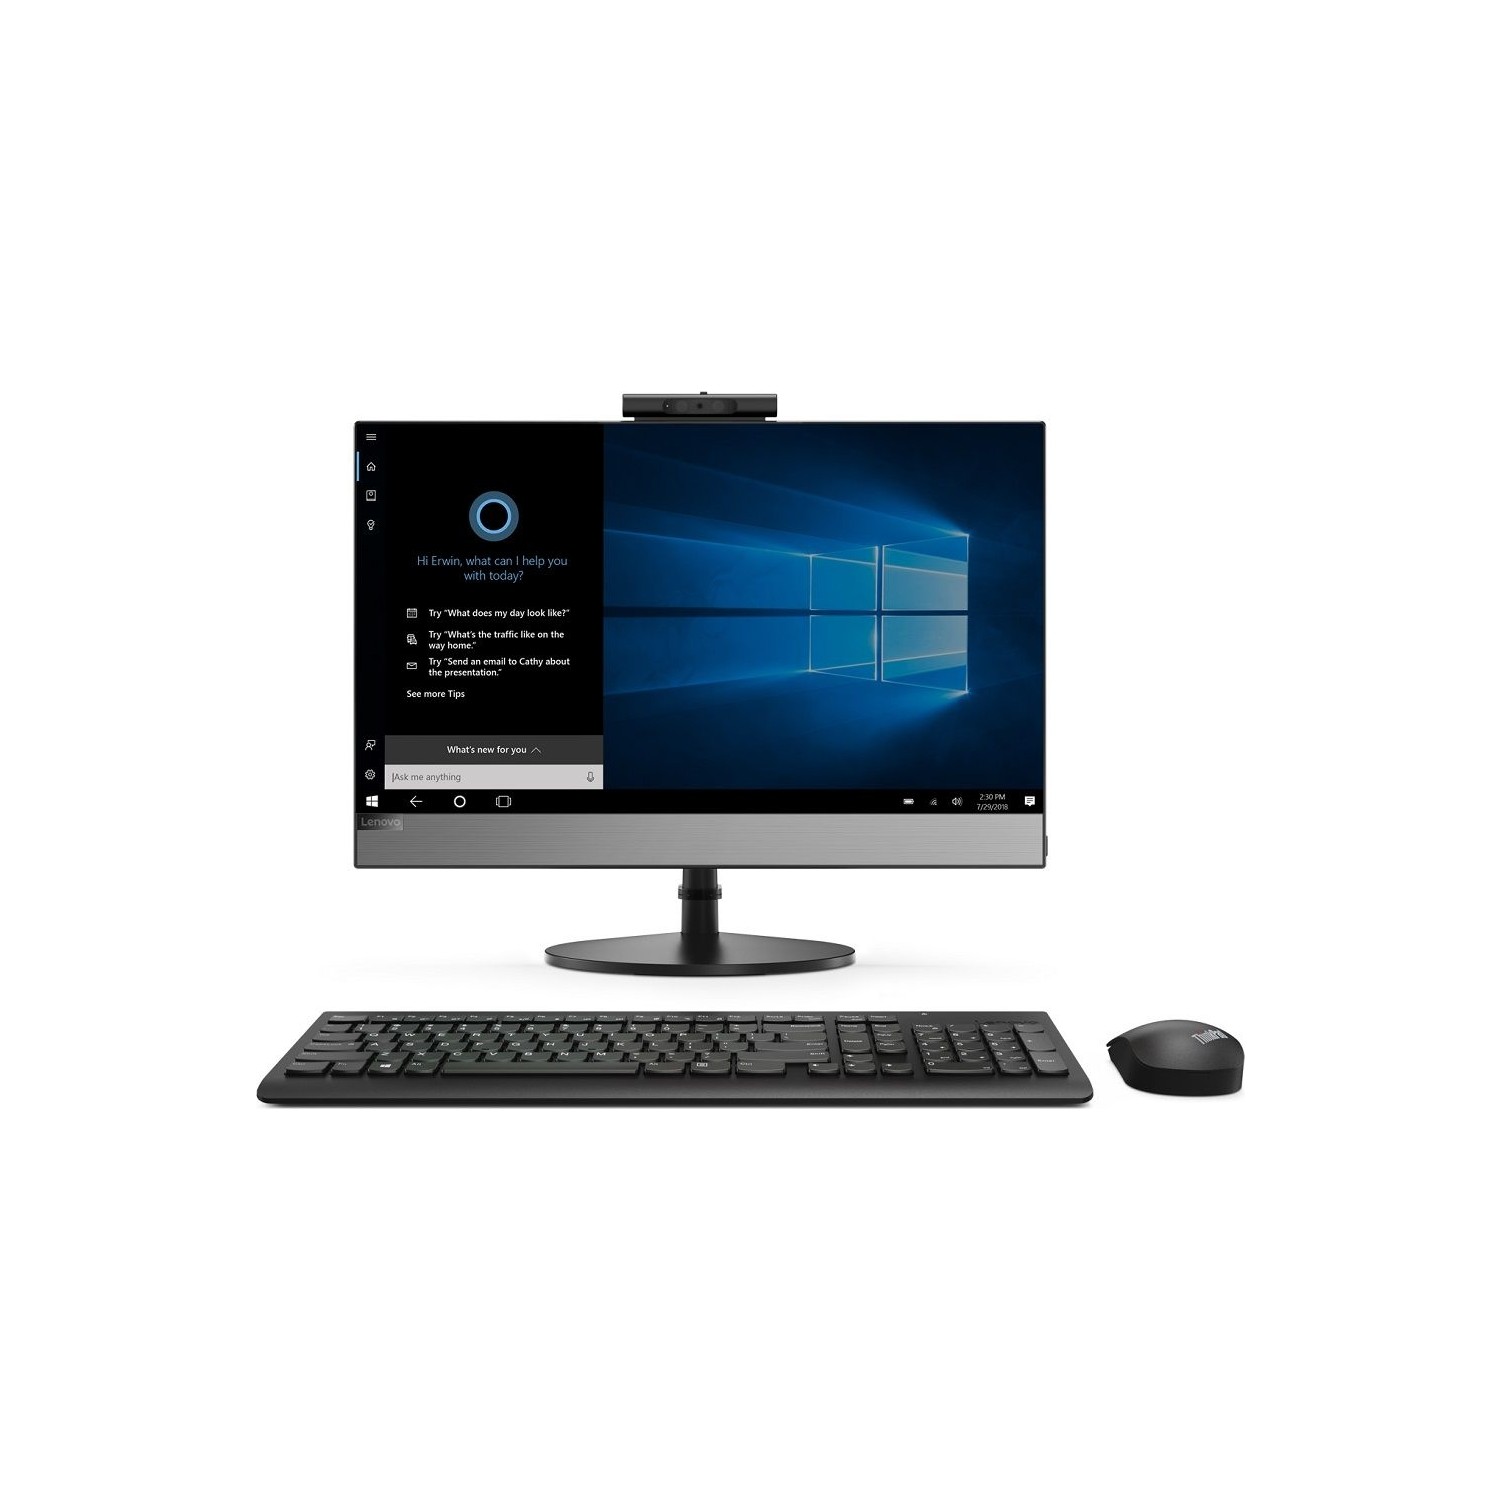 LENOVO V530 10US000ATX I5-8400T 4GB 1TB O/B VGA 21.5" FHD NONTOUCH FREE-DOS ALL IN ONE PC